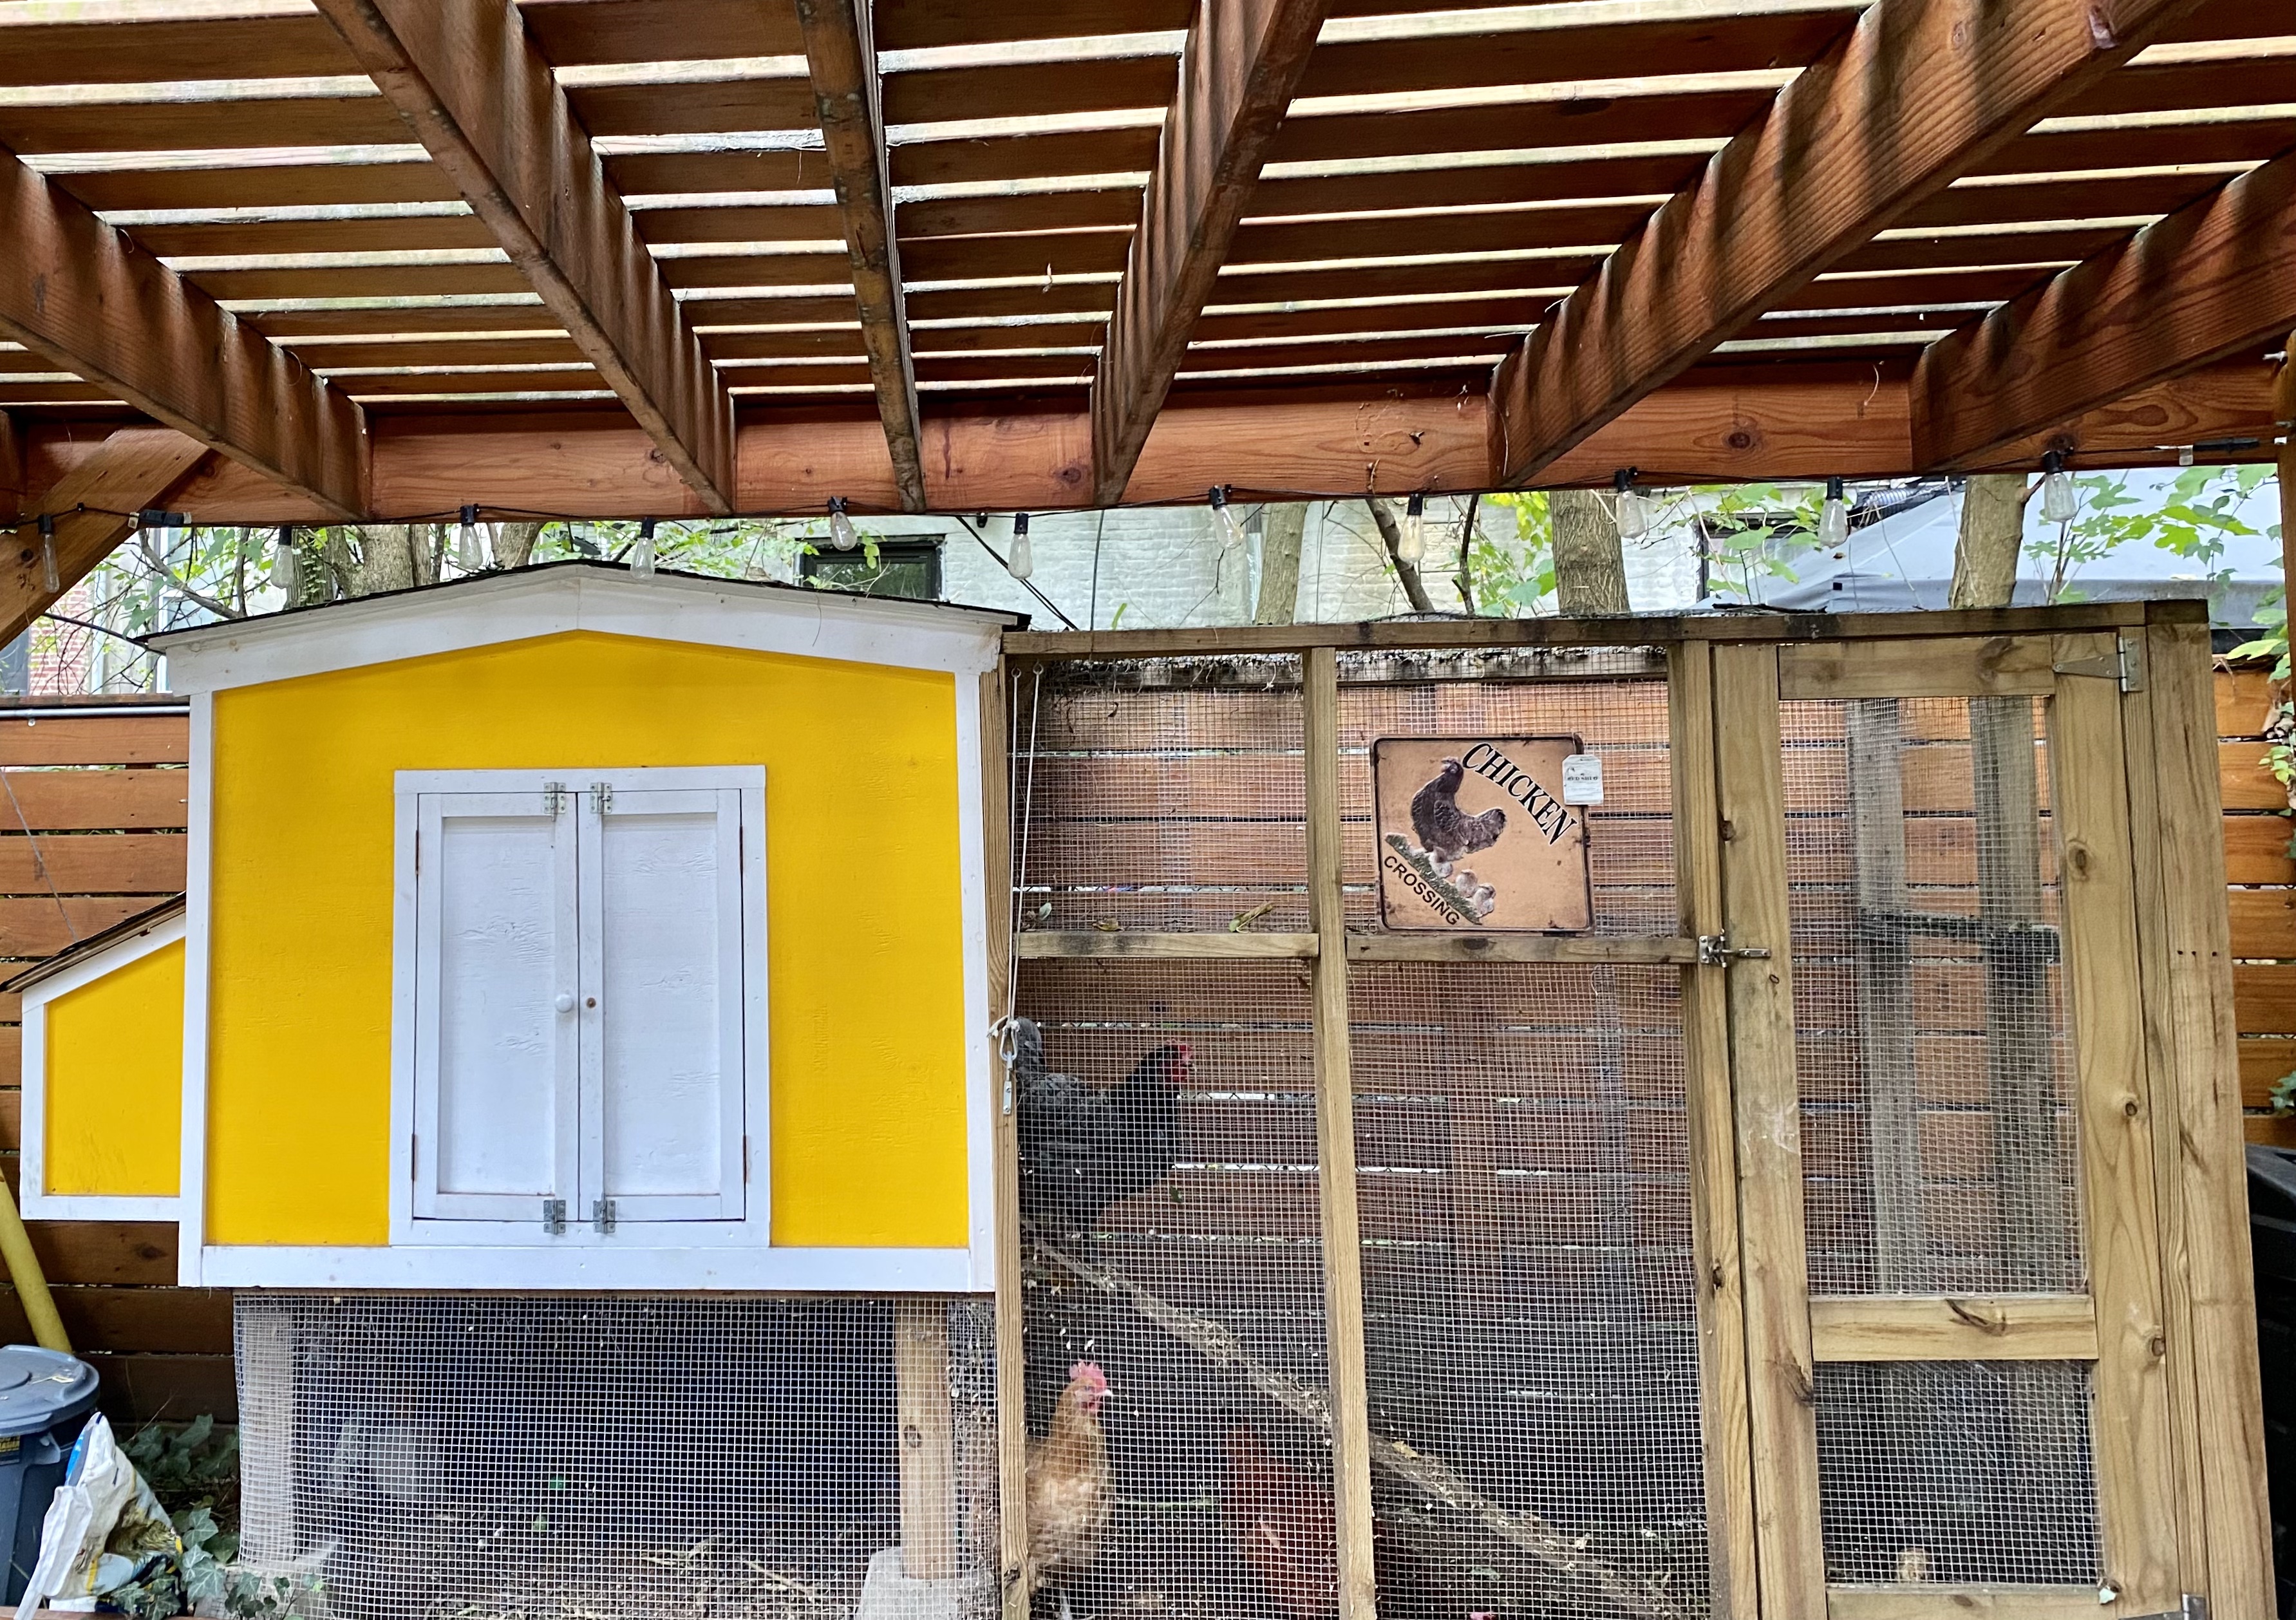 How to keep chickens in a NYC backyard: Tips on coop size, care and feeding